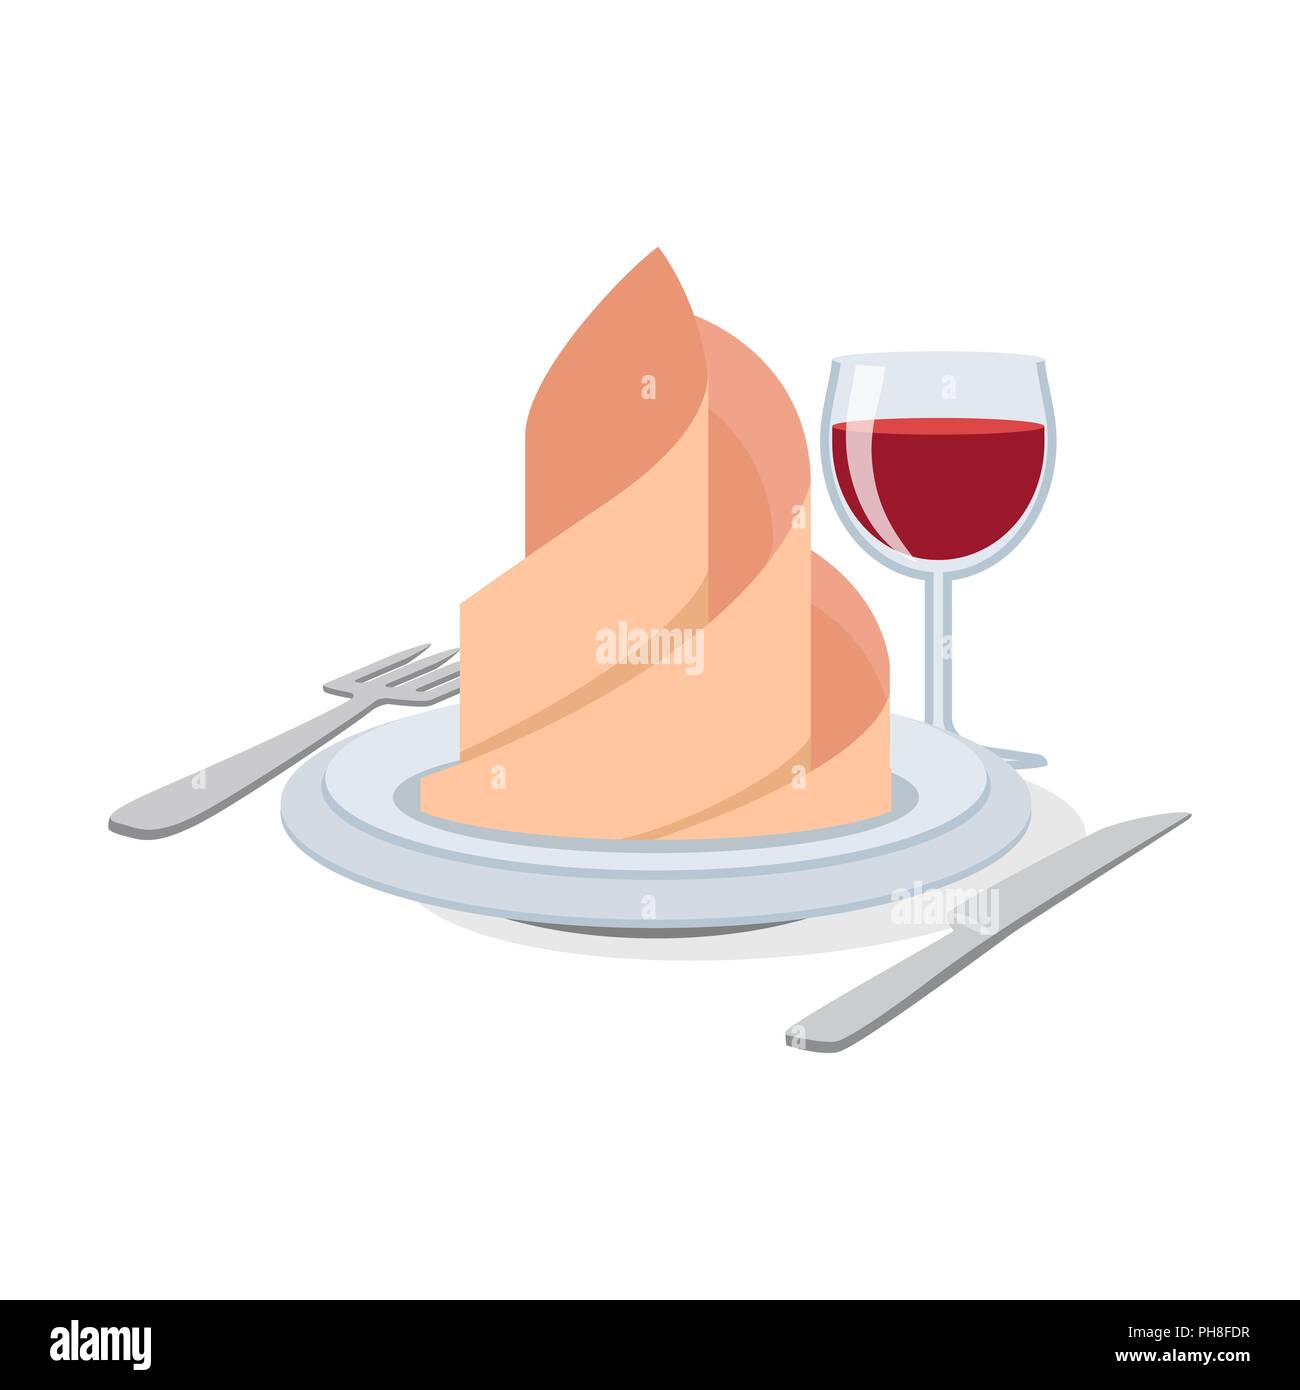 Cutlery set with wineglass, plate, napkin icon flat style. Stock Vector